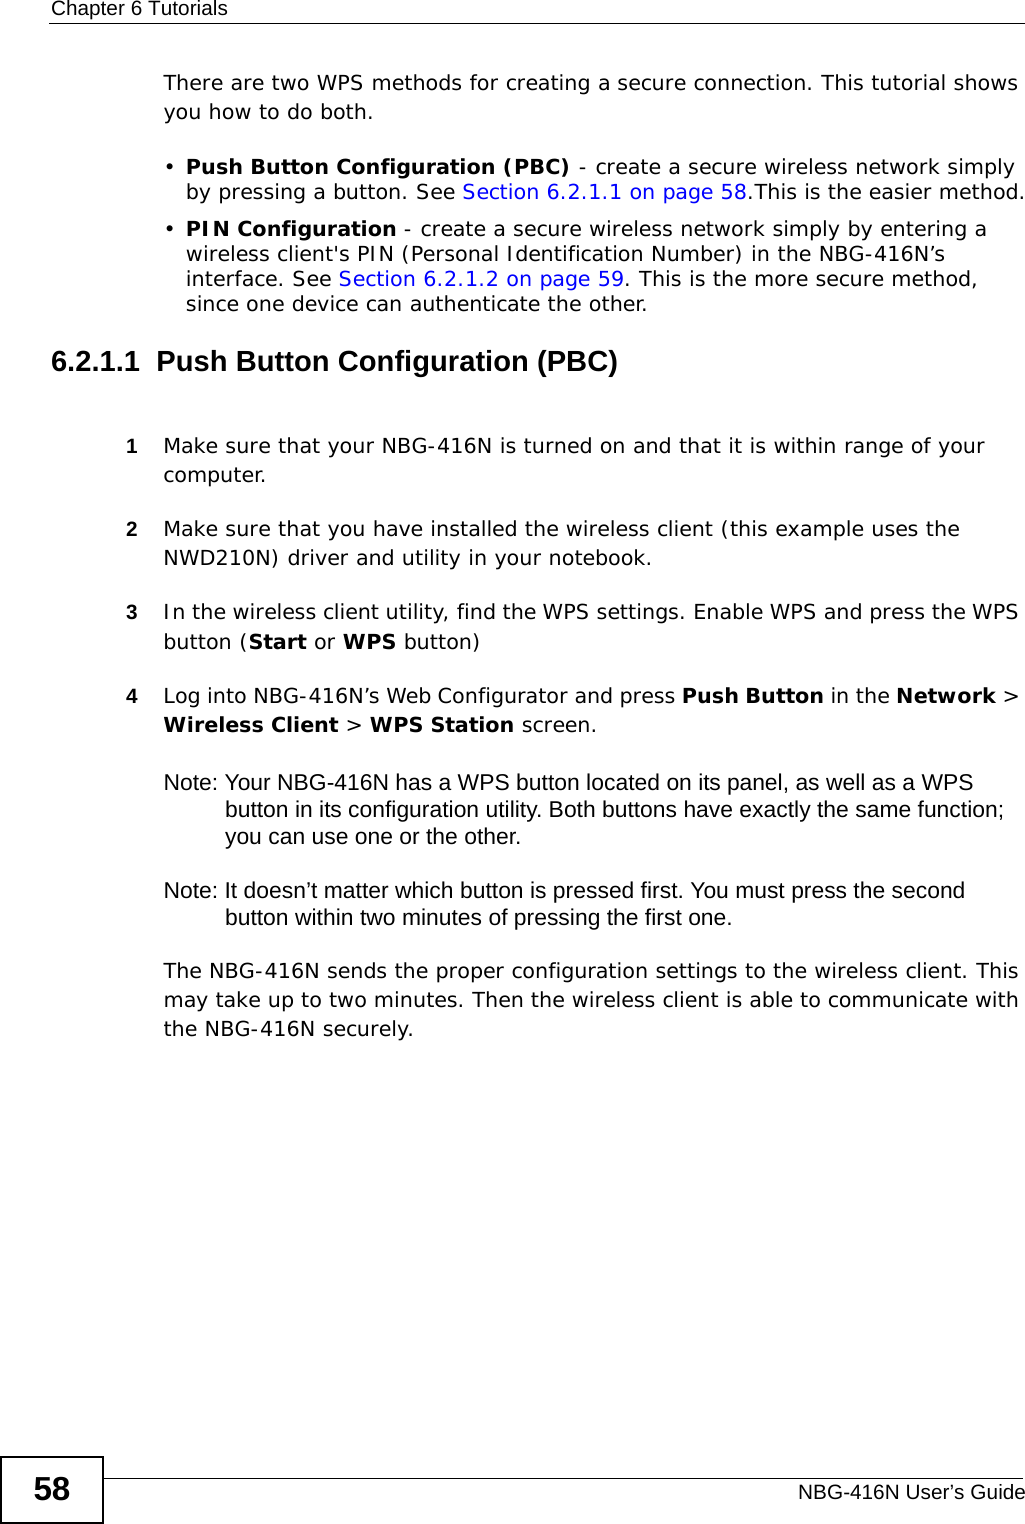 Chapter 6 TutorialsNBG-416N User’s Guide58There are two WPS methods for creating a secure connection. This tutorial shows you how to do both.•Push Button Configuration (PBC) - create a secure wireless network simply by pressing a button. See Section 6.2.1.1 on page 58.This is the easier method.•PIN Configuration - create a secure wireless network simply by entering a wireless client&apos;s PIN (Personal Identification Number) in the NBG-416N’s interface. See Section 6.2.1.2 on page 59. This is the more secure method, since one device can authenticate the other.6.2.1.1  Push Button Configuration (PBC)1Make sure that your NBG-416N is turned on and that it is within range of your computer. 2Make sure that you have installed the wireless client (this example uses the NWD210N) driver and utility in your notebook.3In the wireless client utility, find the WPS settings. Enable WPS and press the WPS button (Start or WPS button)4Log into NBG-416N’s Web Configurator and press Push Button in the Network &gt; Wireless Client &gt; WPS Station screen. Note: Your NBG-416N has a WPS button located on its panel, as well as a WPS button in its configuration utility. Both buttons have exactly the same function; you can use one or the other.Note: It doesn’t matter which button is pressed first. You must press the second button within two minutes of pressing the first one. The NBG-416N sends the proper configuration settings to the wireless client. This may take up to two minutes. Then the wireless client is able to communicate with the NBG-416N securely. 